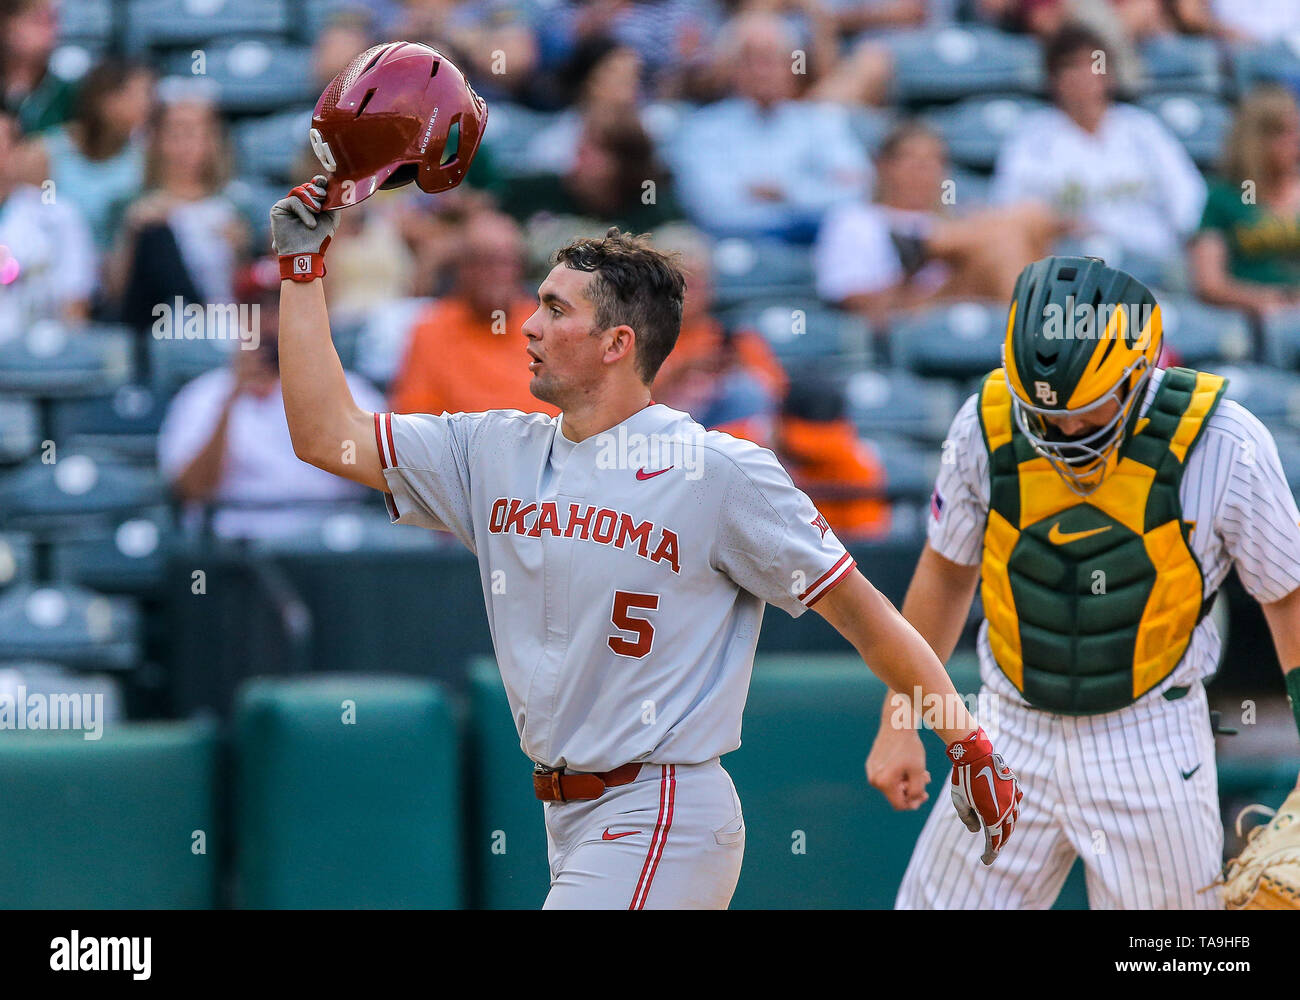 Oklahoma City, OK, USA. 22nd May, 2019. University of Oklahoma infielder Conor McKenna (5) after hitting solo home run during a 2019 Phillips 66 Big 12 Baseball Championship first round game between the Oklahoma Sooners and the Baylor Bears at Chickasaw Bricktown Ballpark in Oklahoma City, OK. Gray Siegel/CSM/Alamy Live News Stock Photo